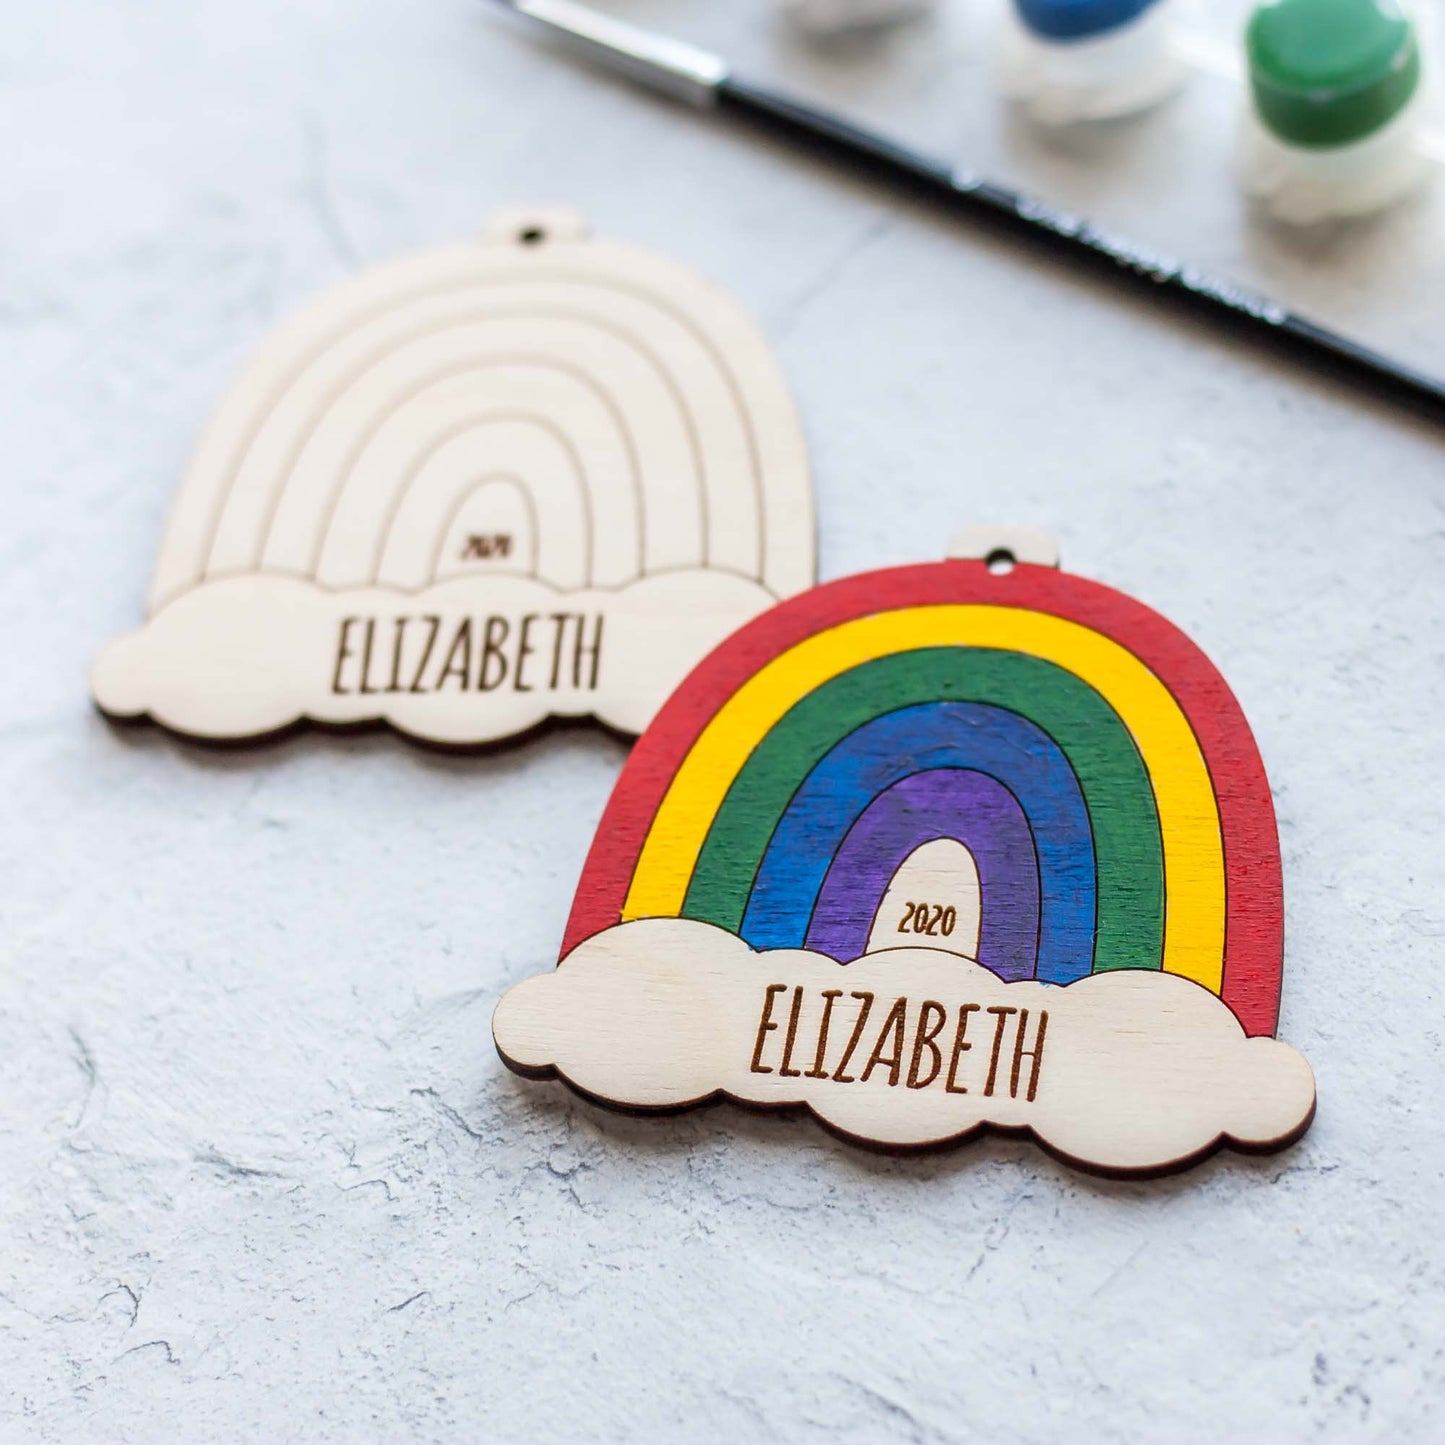 Wooden Ornament Paint Kits: Rainbows Engraved and Laser Cut in Birch Plywood with 6 primary paint colors included by LeeMo Designs in Bend, Oregon